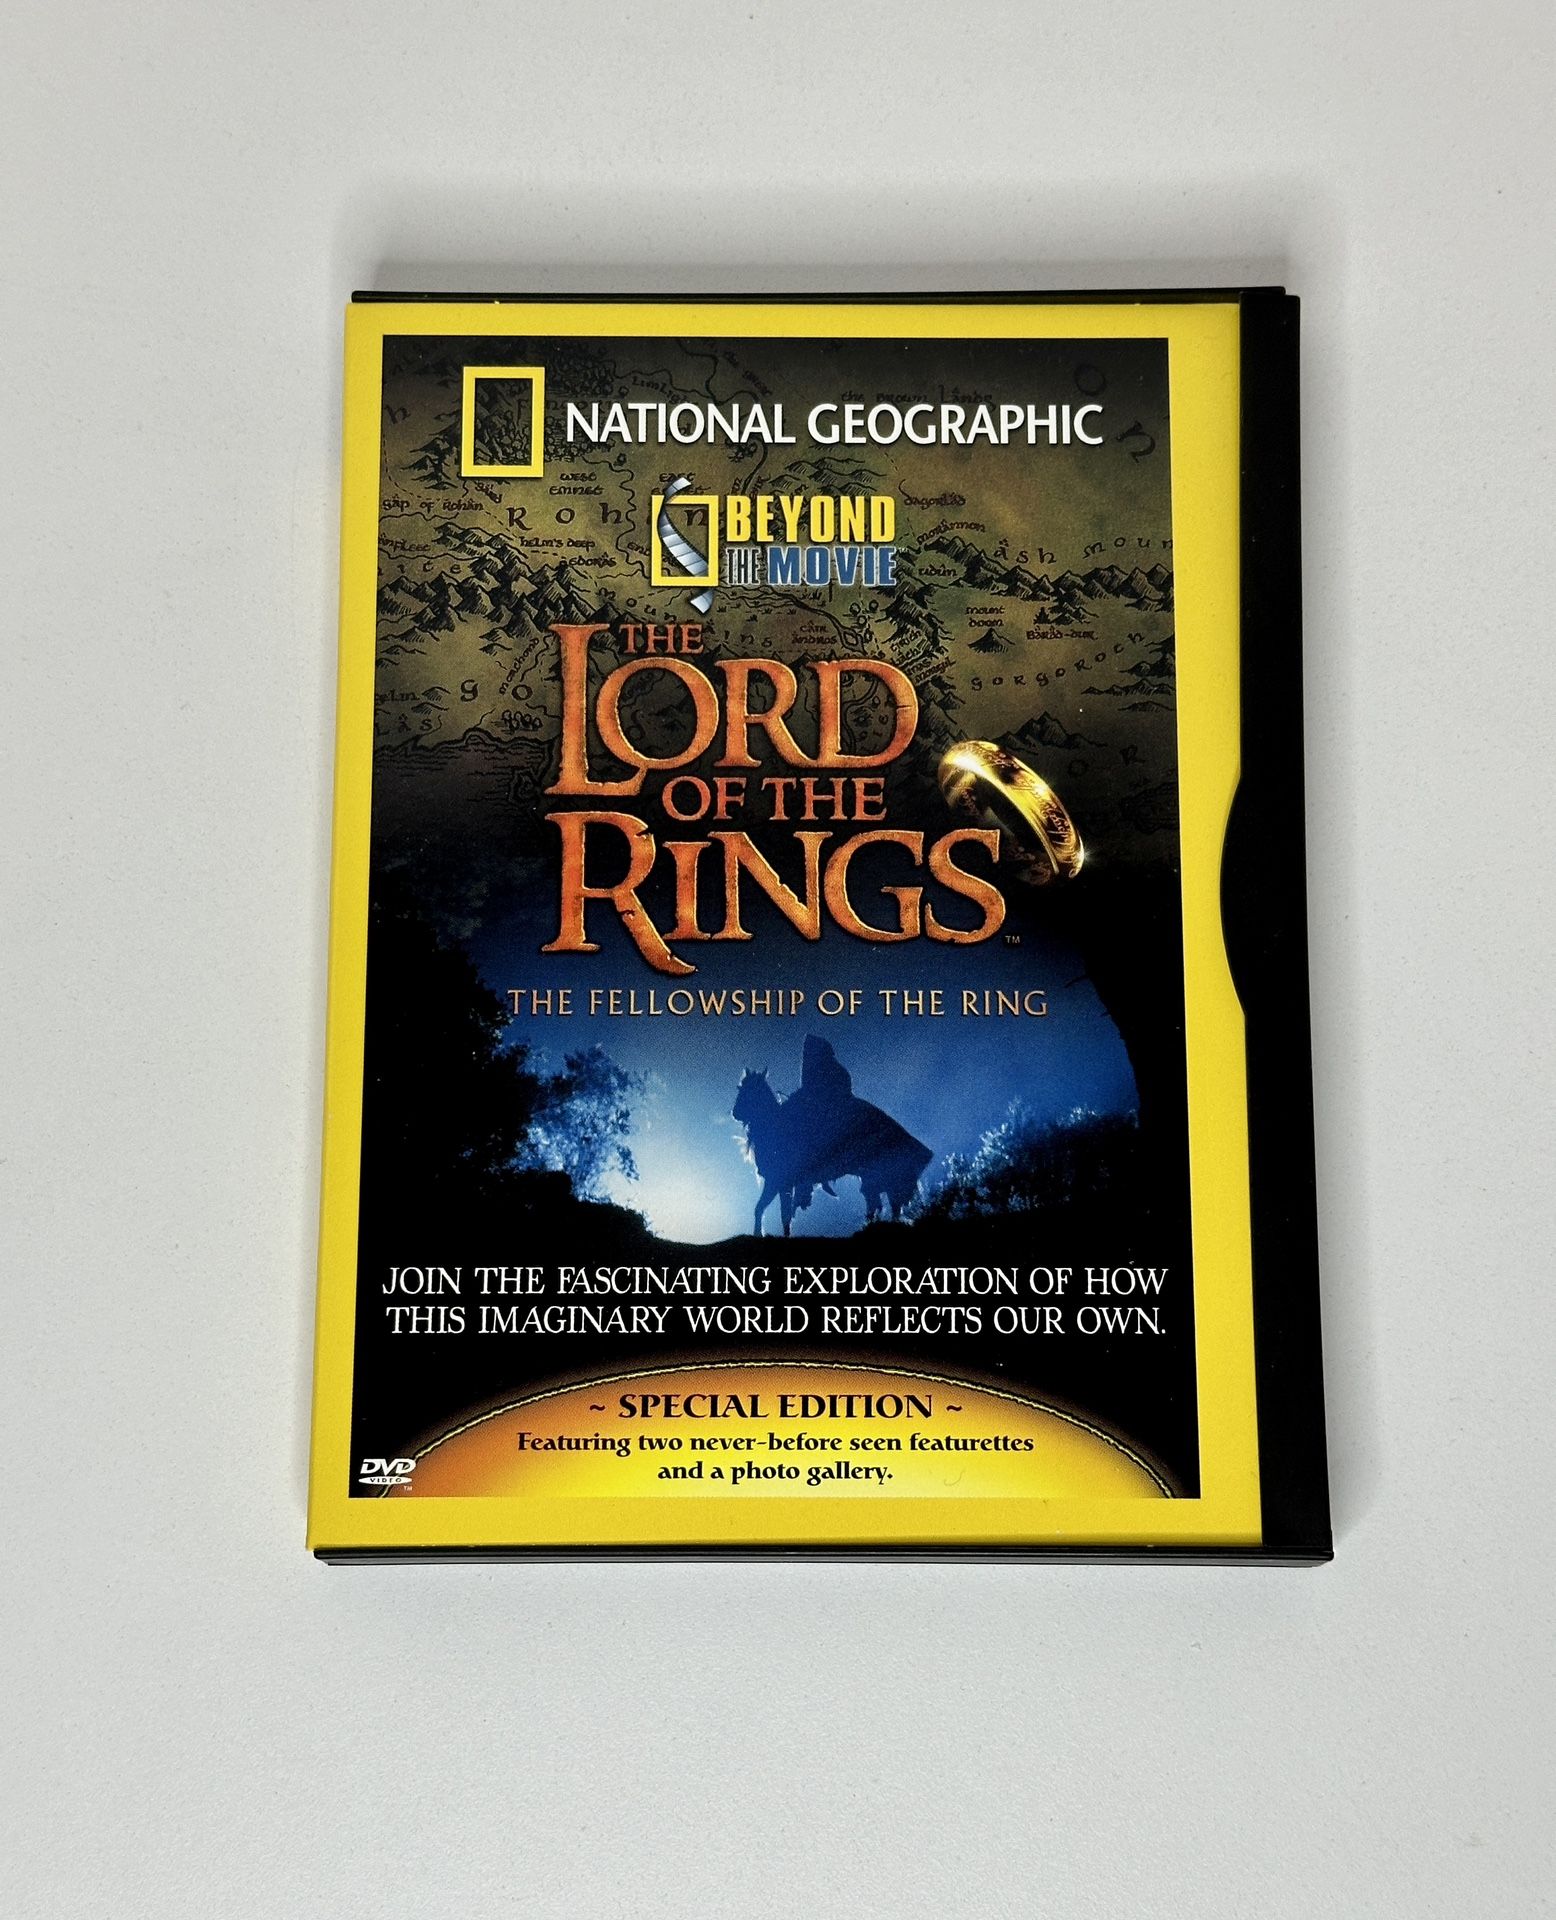 National Geographic “Beyond the Movie – The Lord of the Rings: The Fellowship of the Ring” DVD